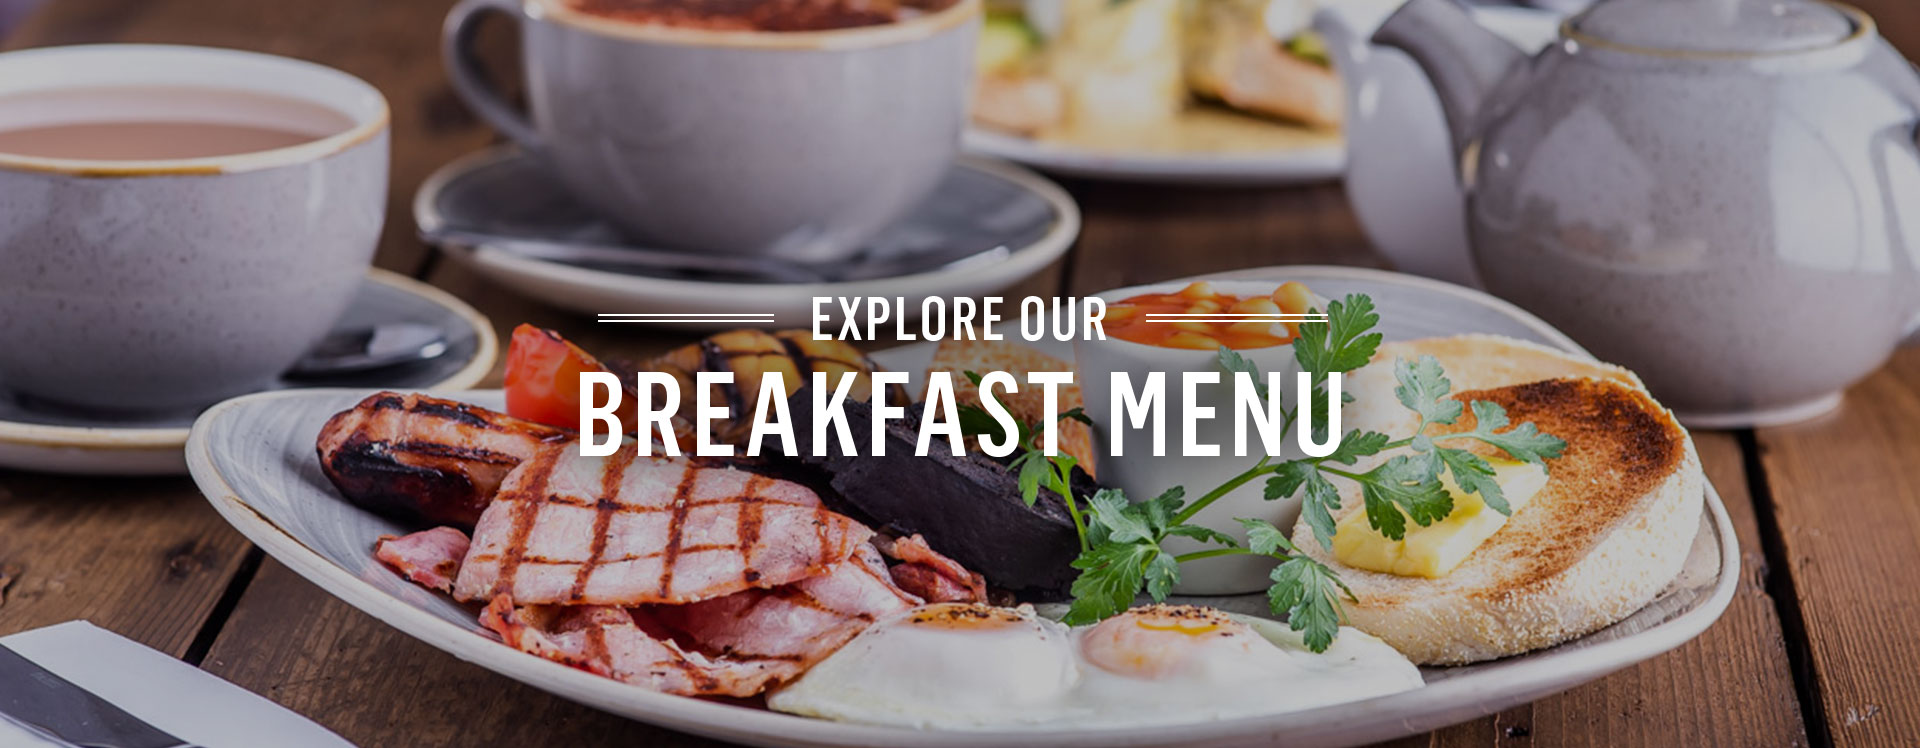 Breakfast at The Sawyer's Arms - Book a table